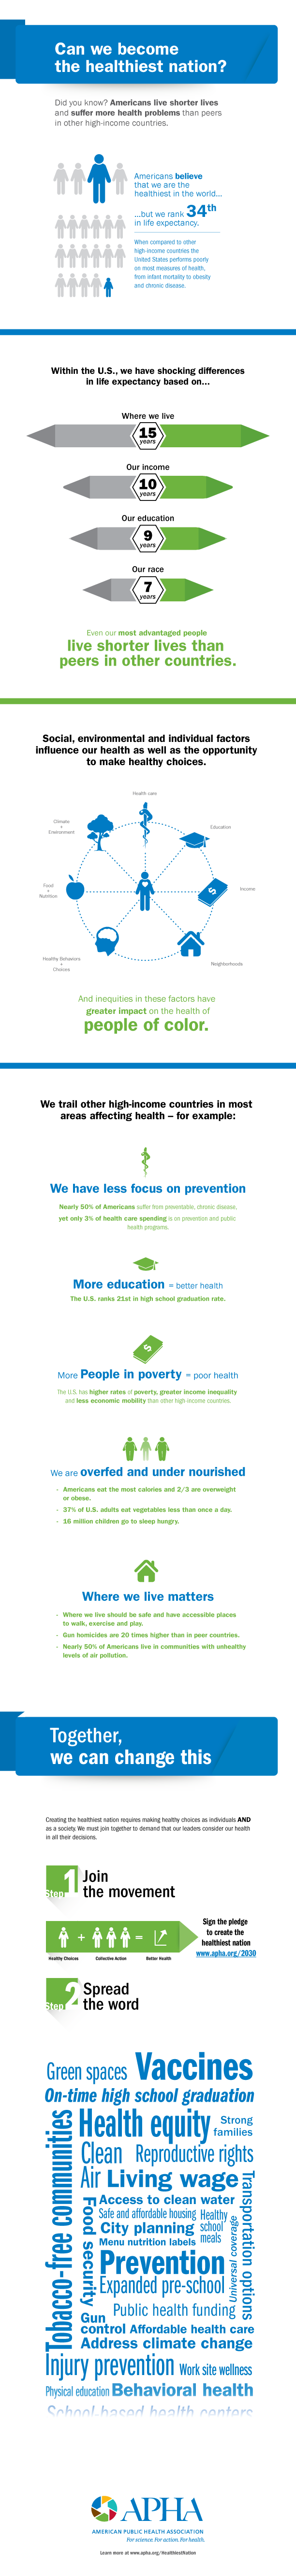 Infographic answering Can we become the healthiest nation?